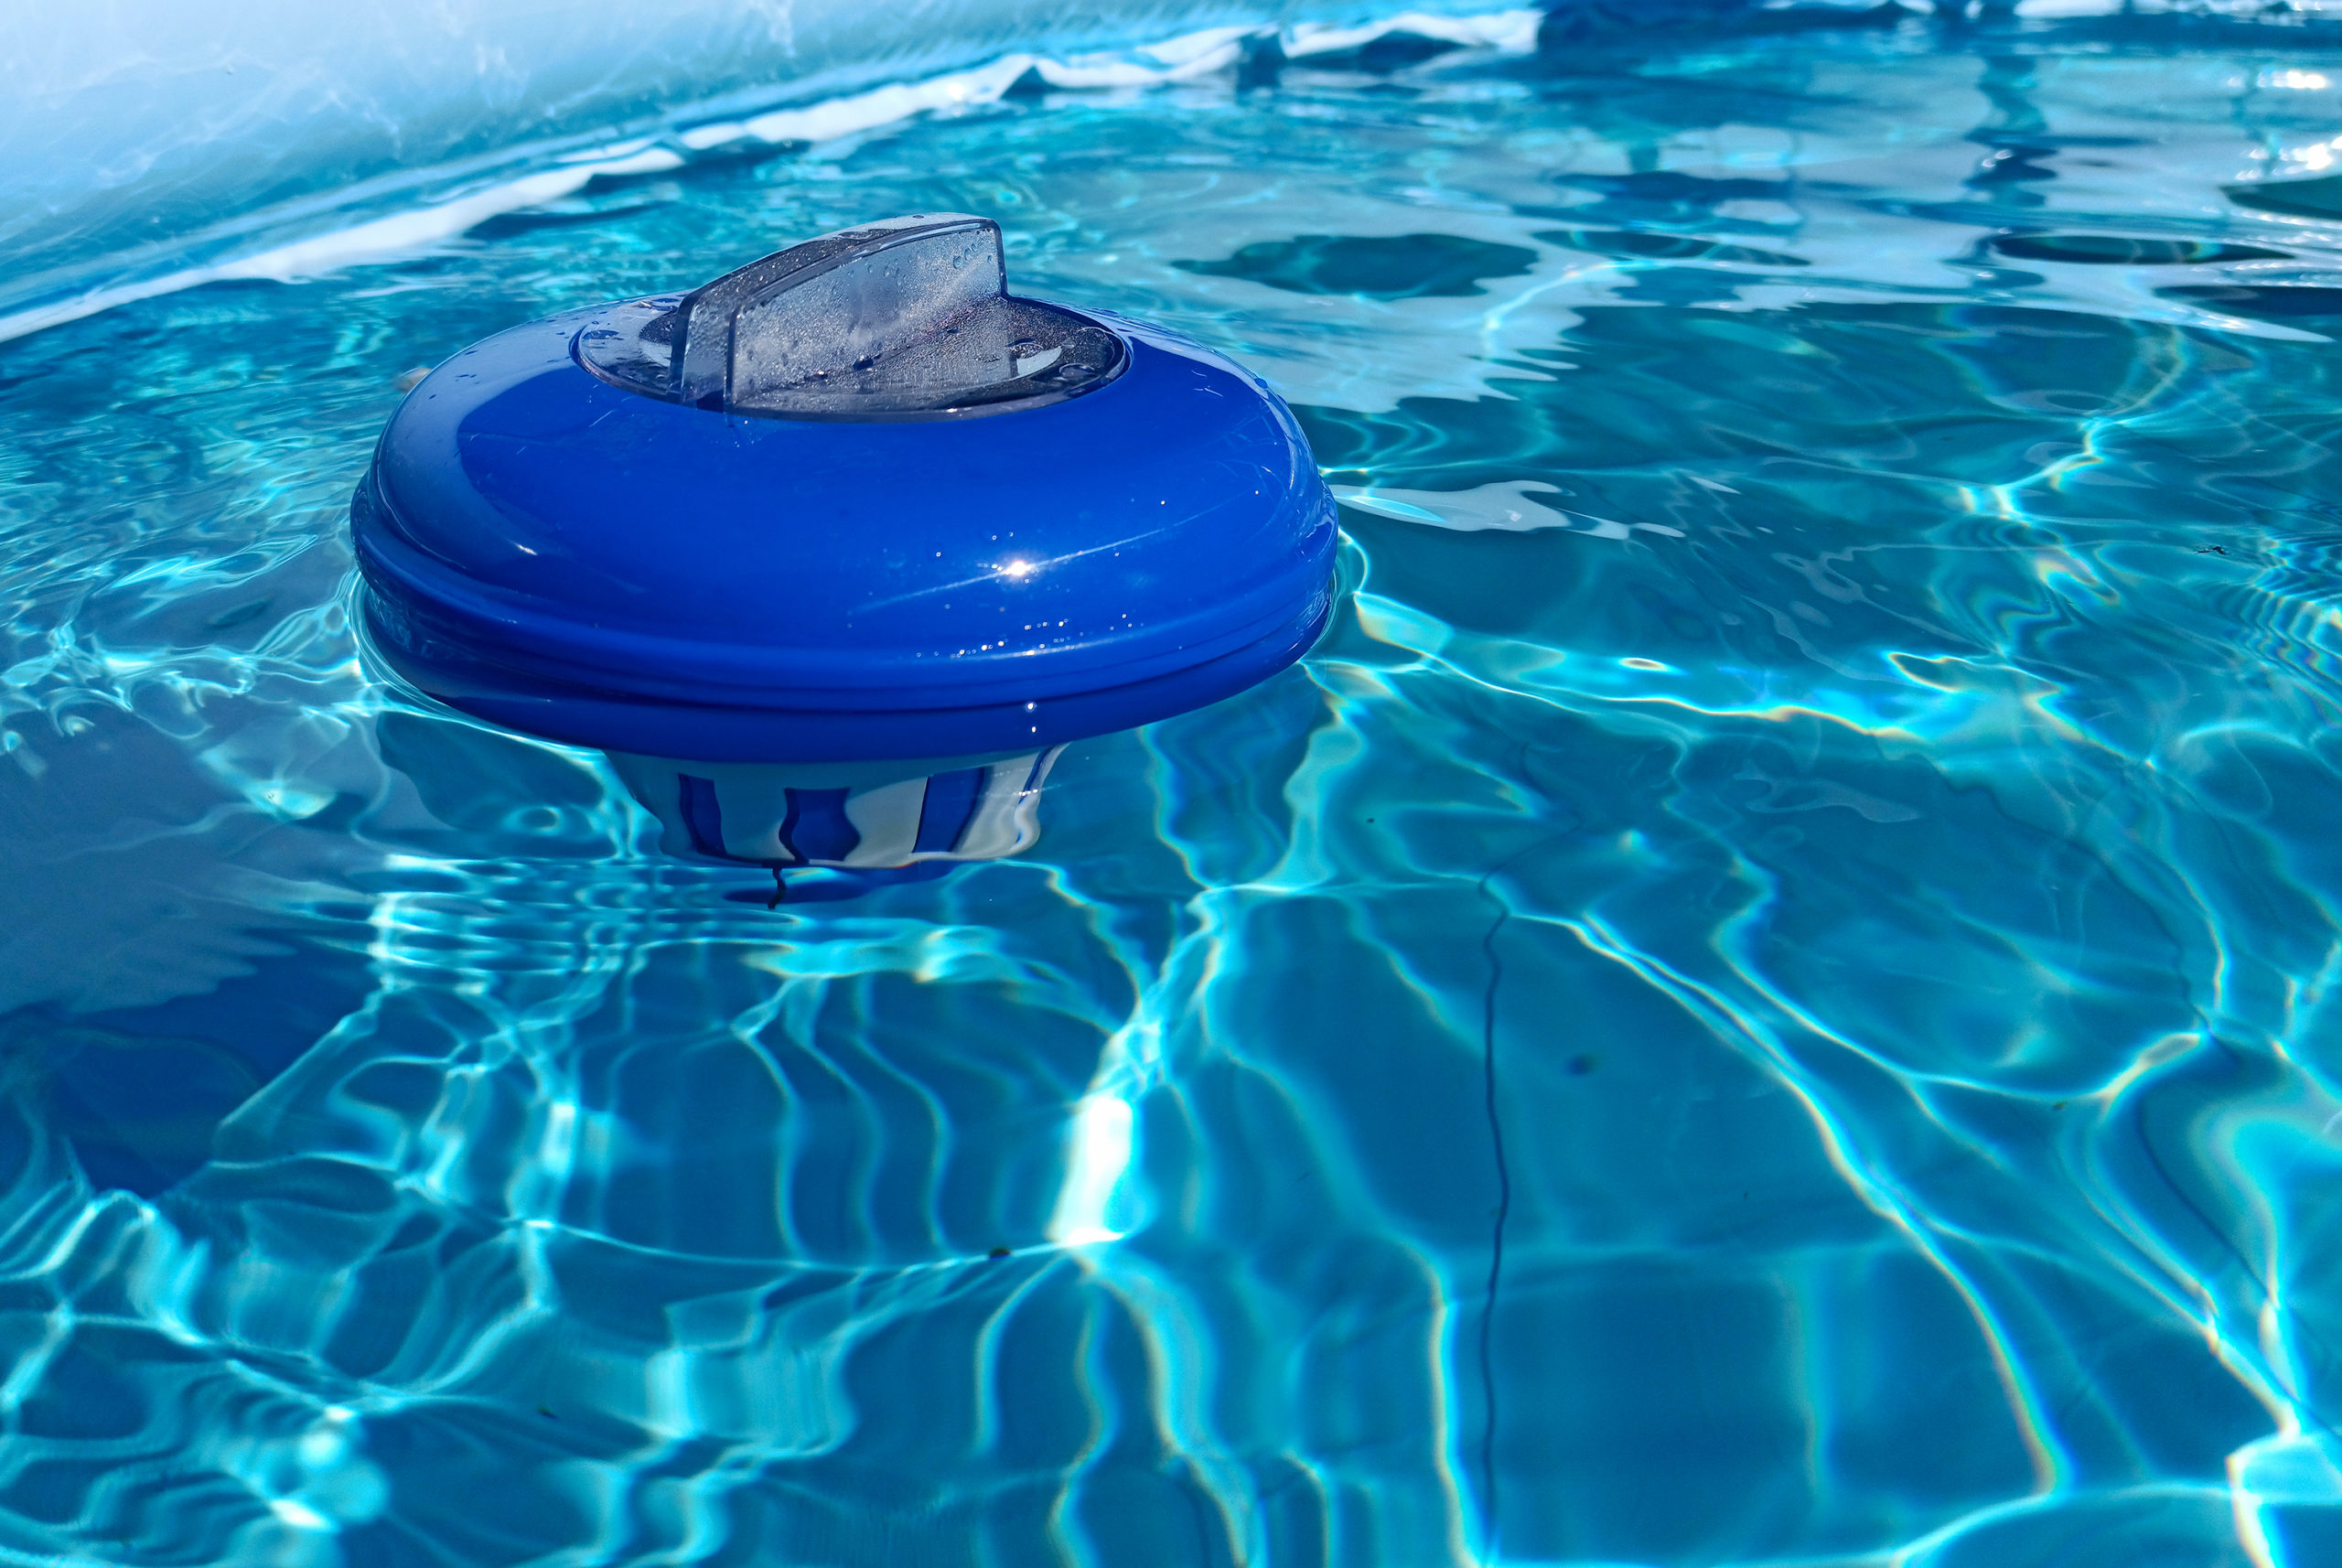 Smart pool technology, consisting of connected devices and systems that enable remote monitoring, control, and automation of various pool functions such as filtration, temperature, lighting, and water chemistry